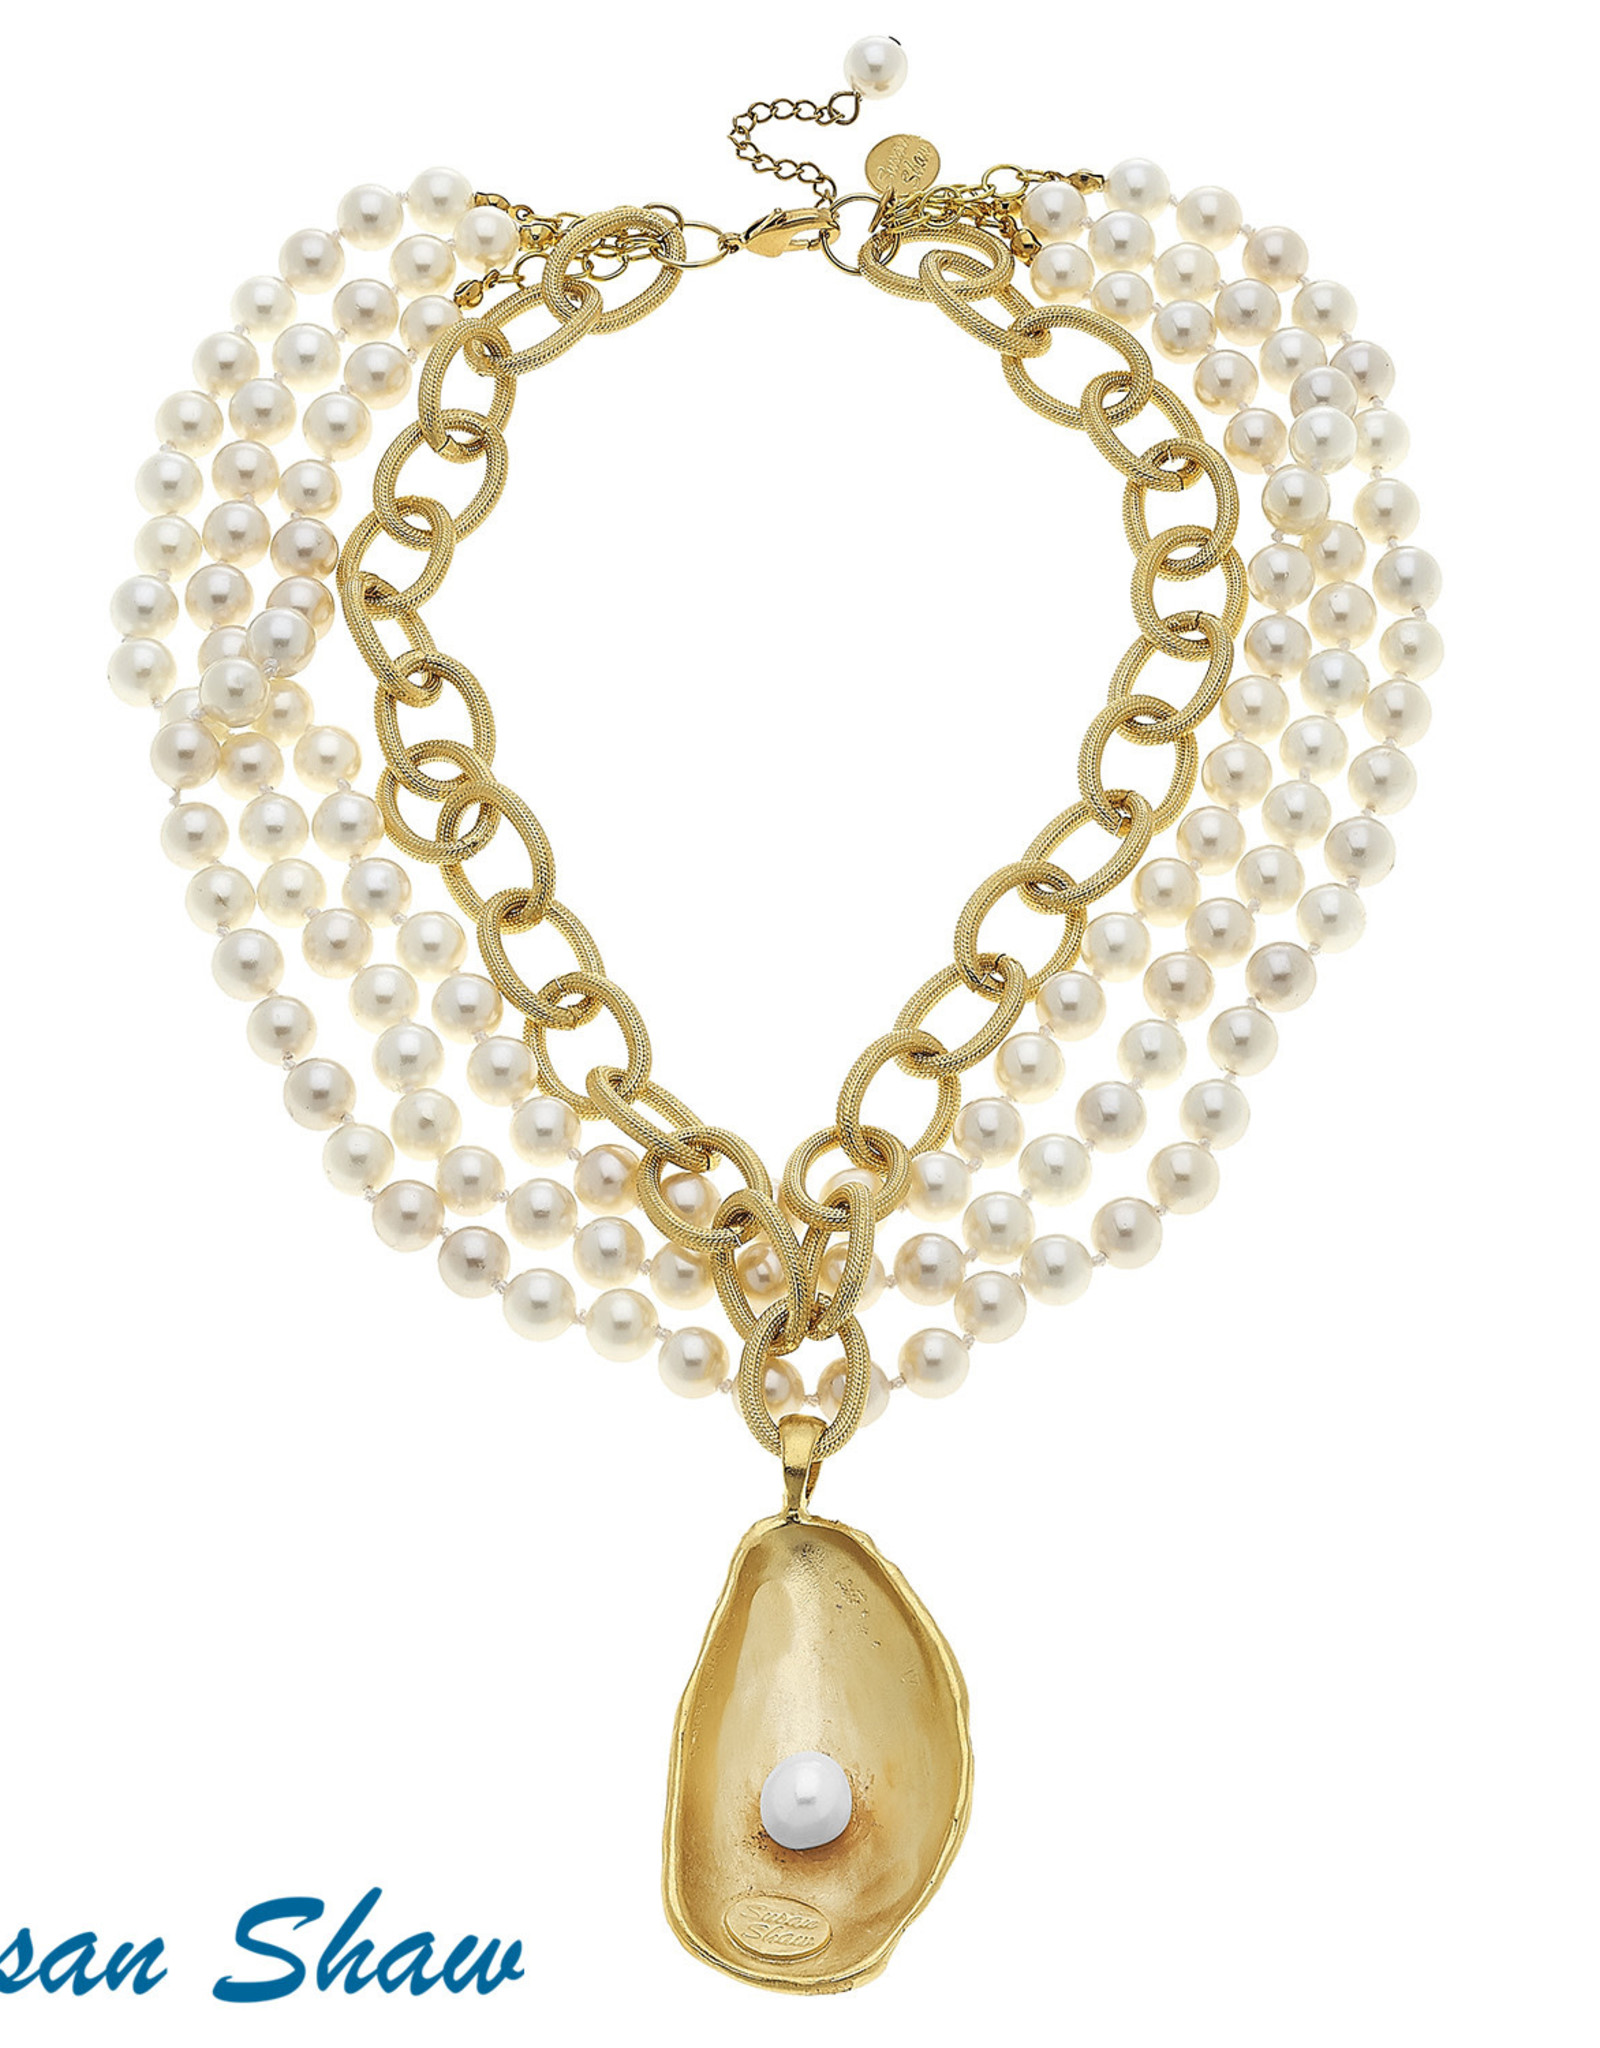 Susan Shaw Pearl & Oyster Necklace